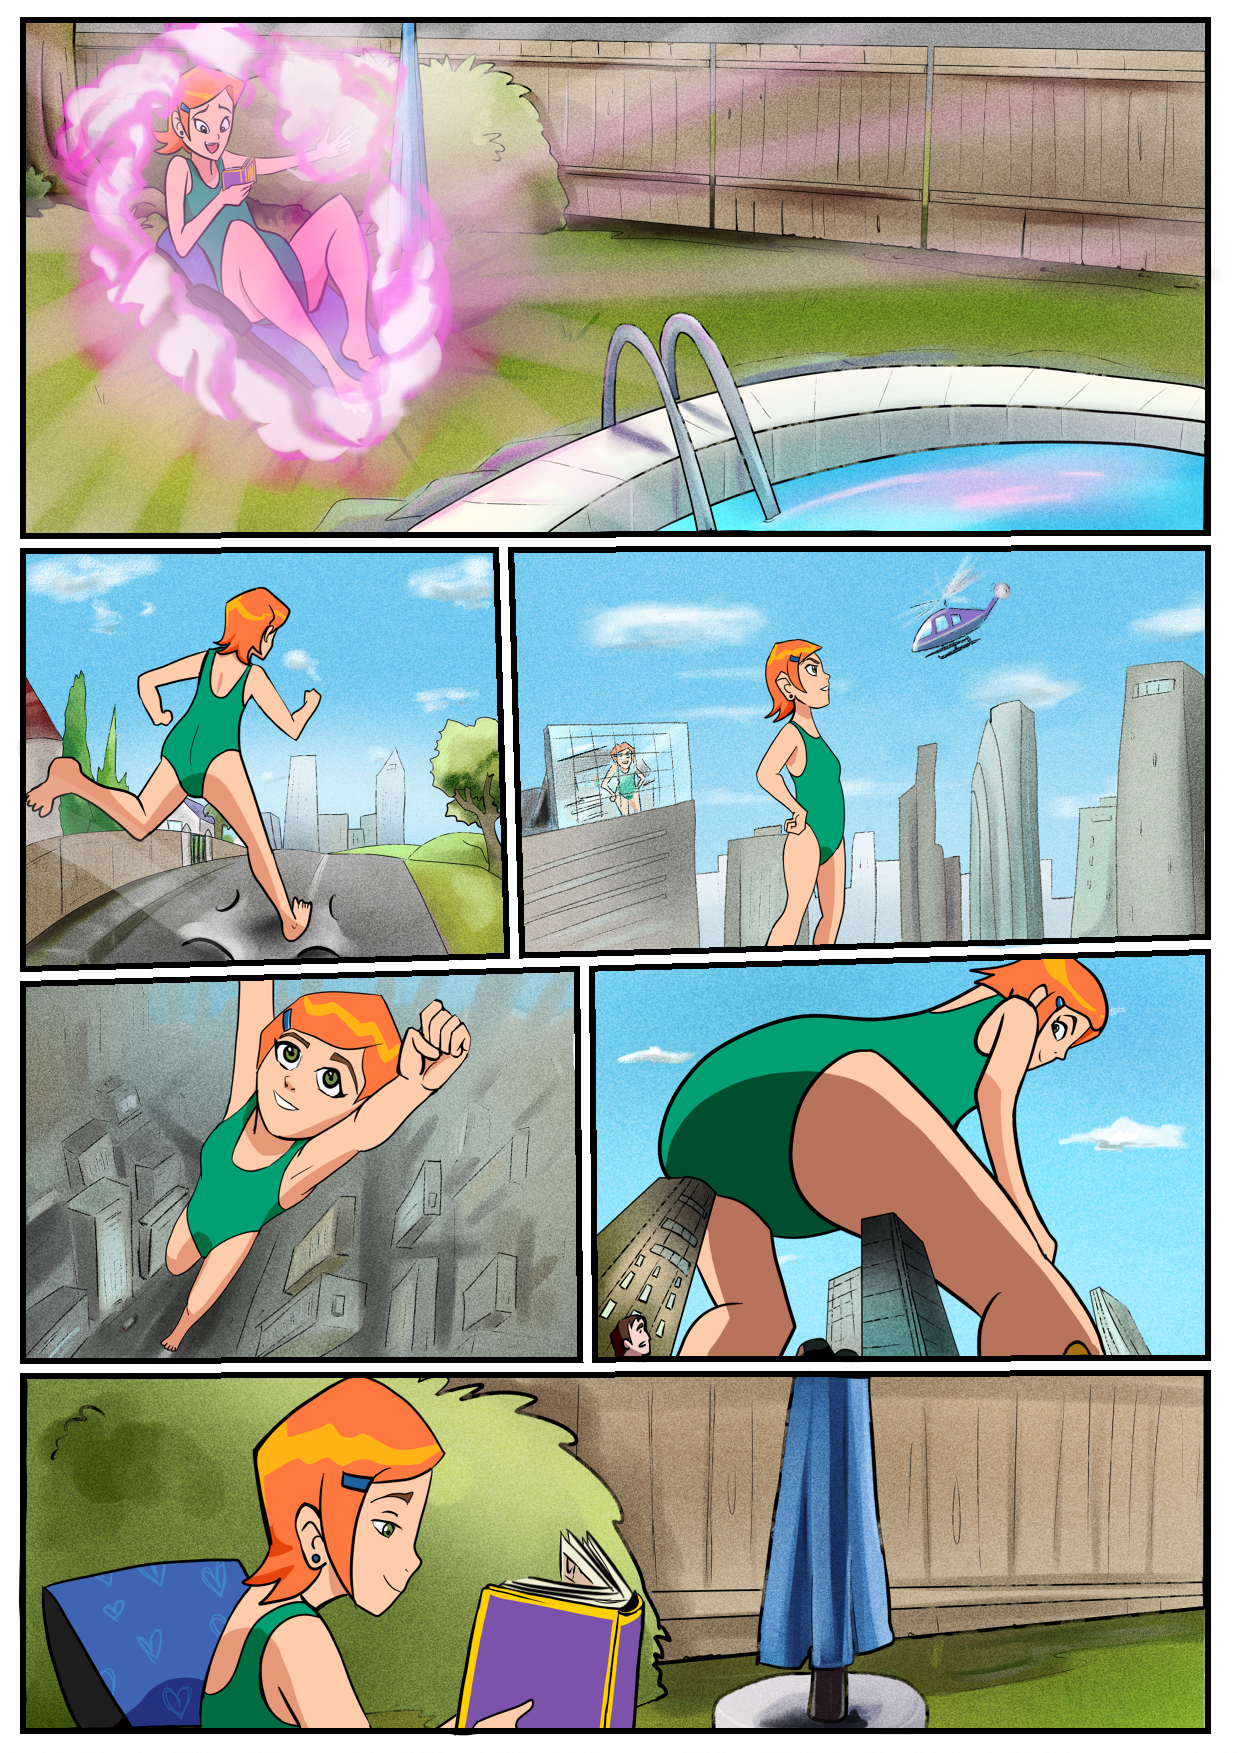 Gwen dreams of being a giantess.